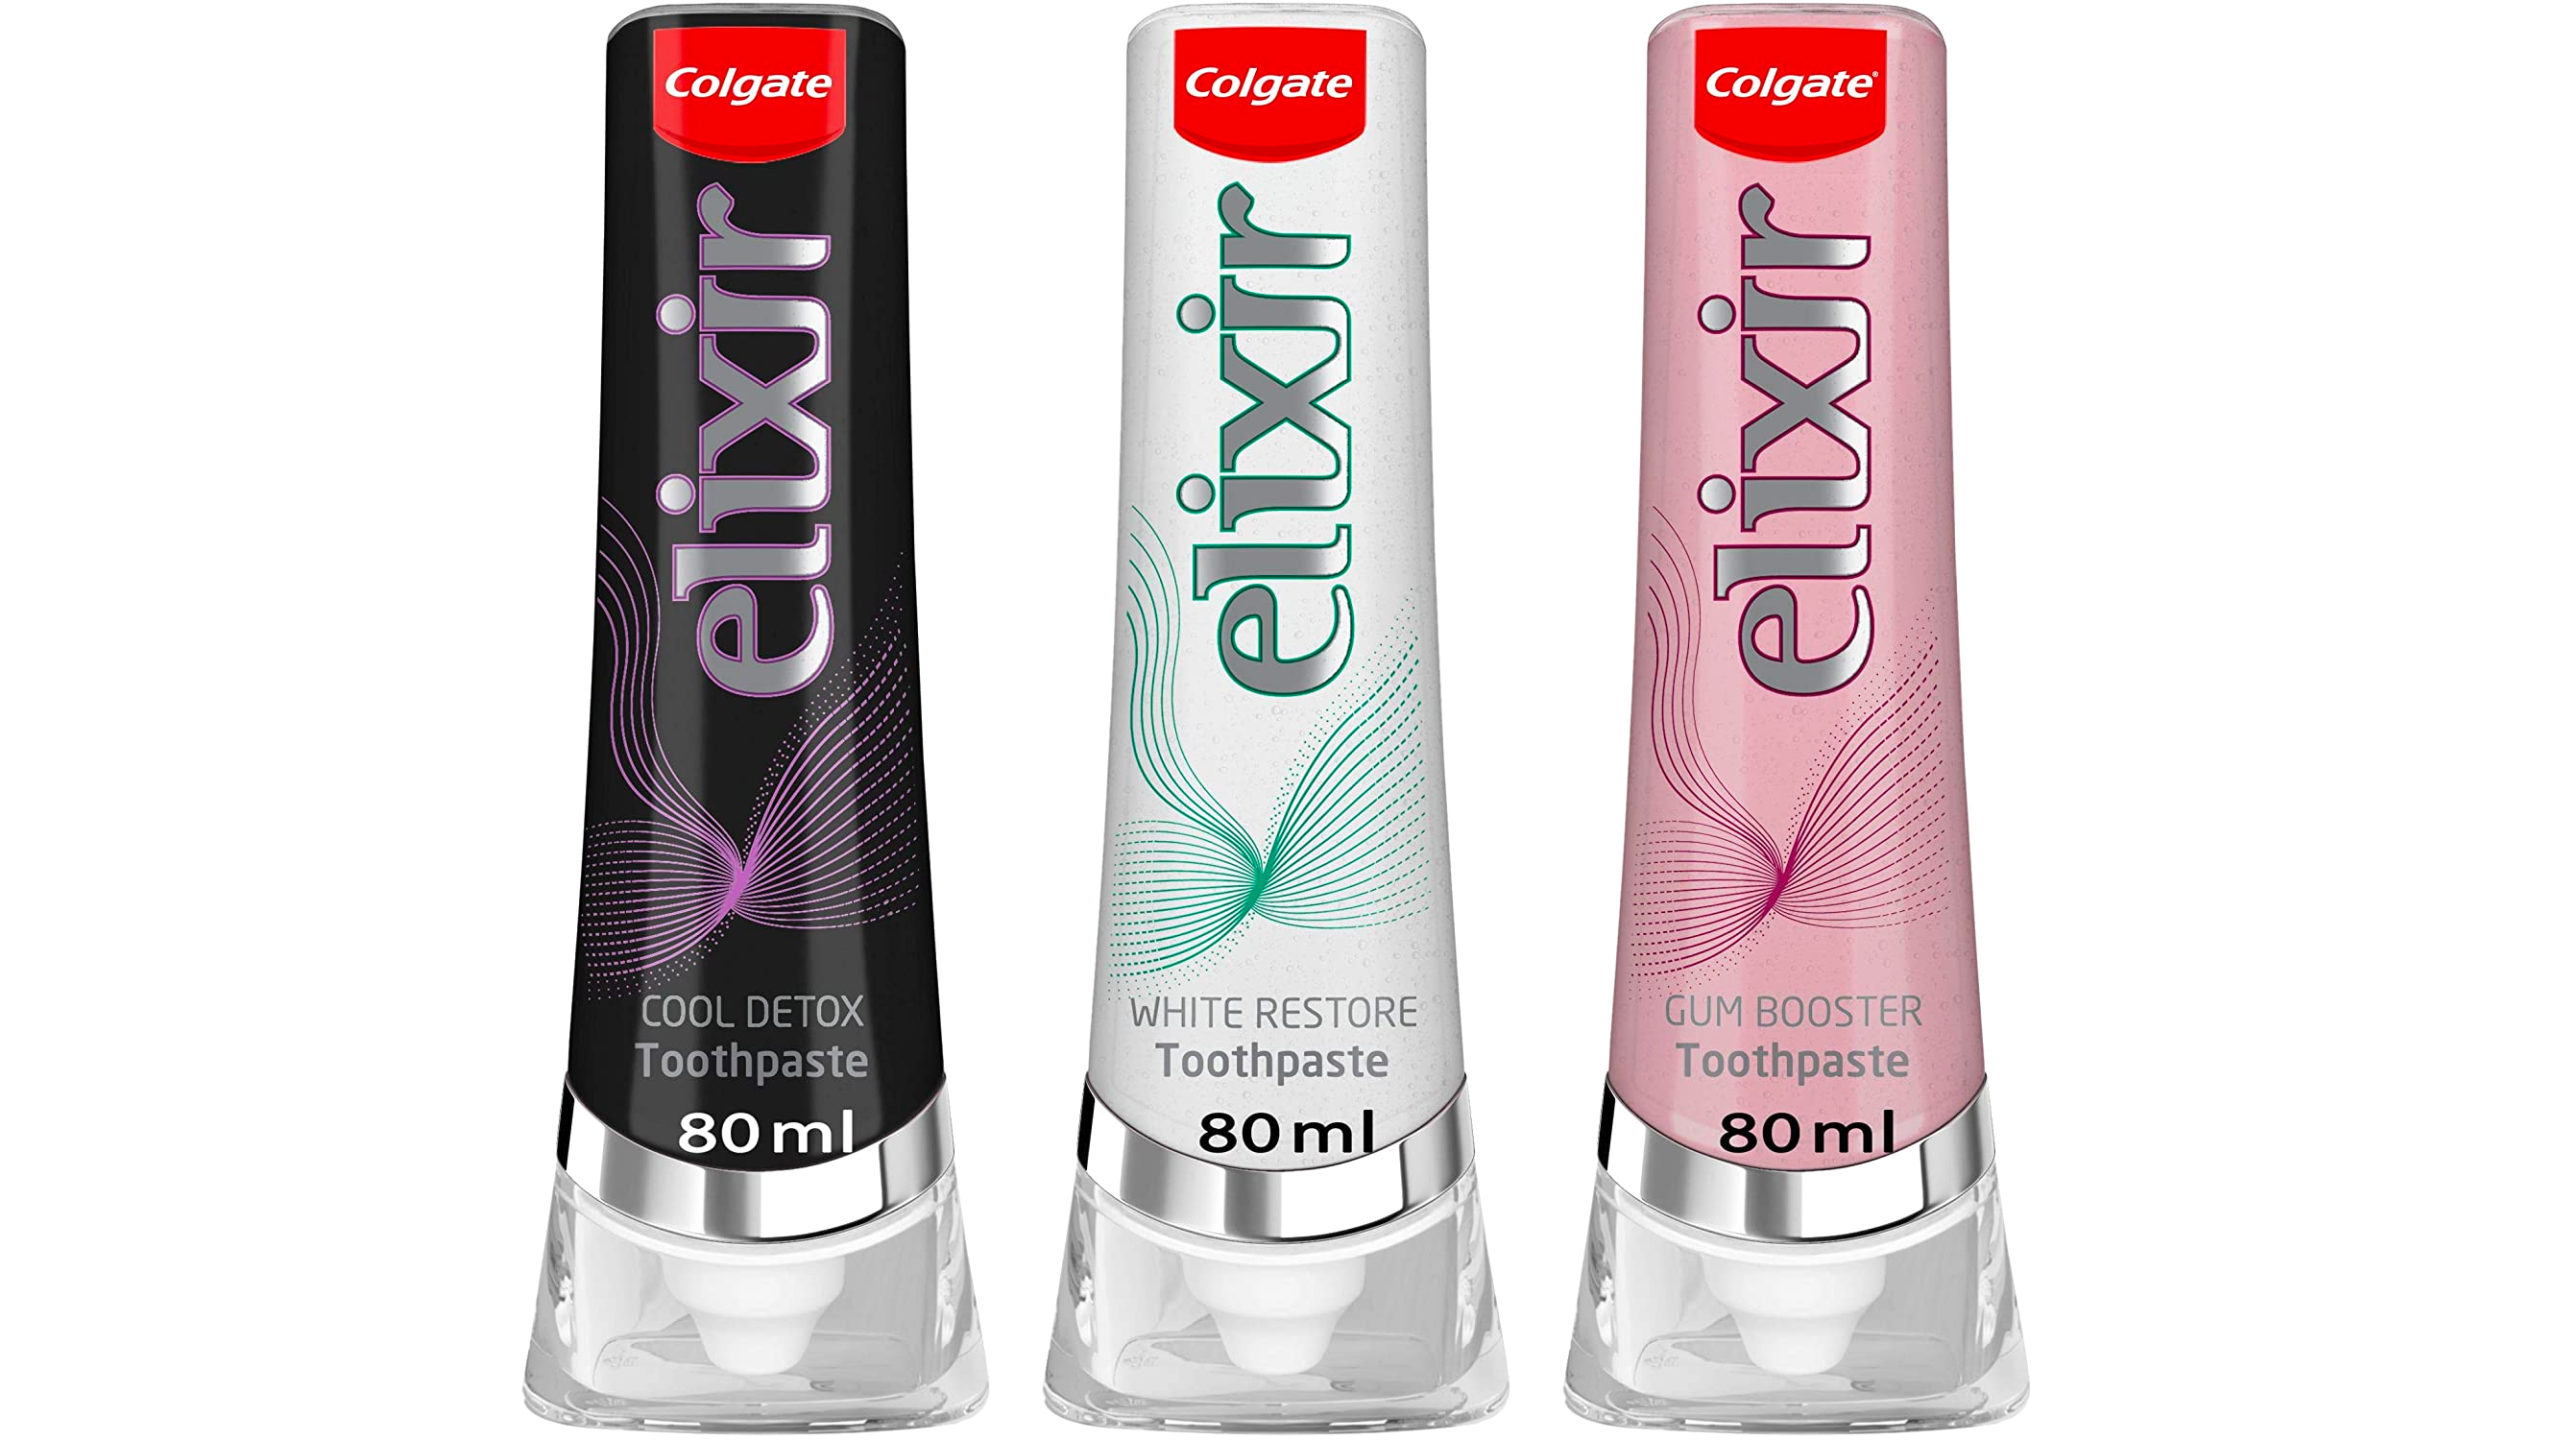 Colgate’s New High-Tech Nonstick Toothpaste Tubes Help You Squeeze Out Every Drop